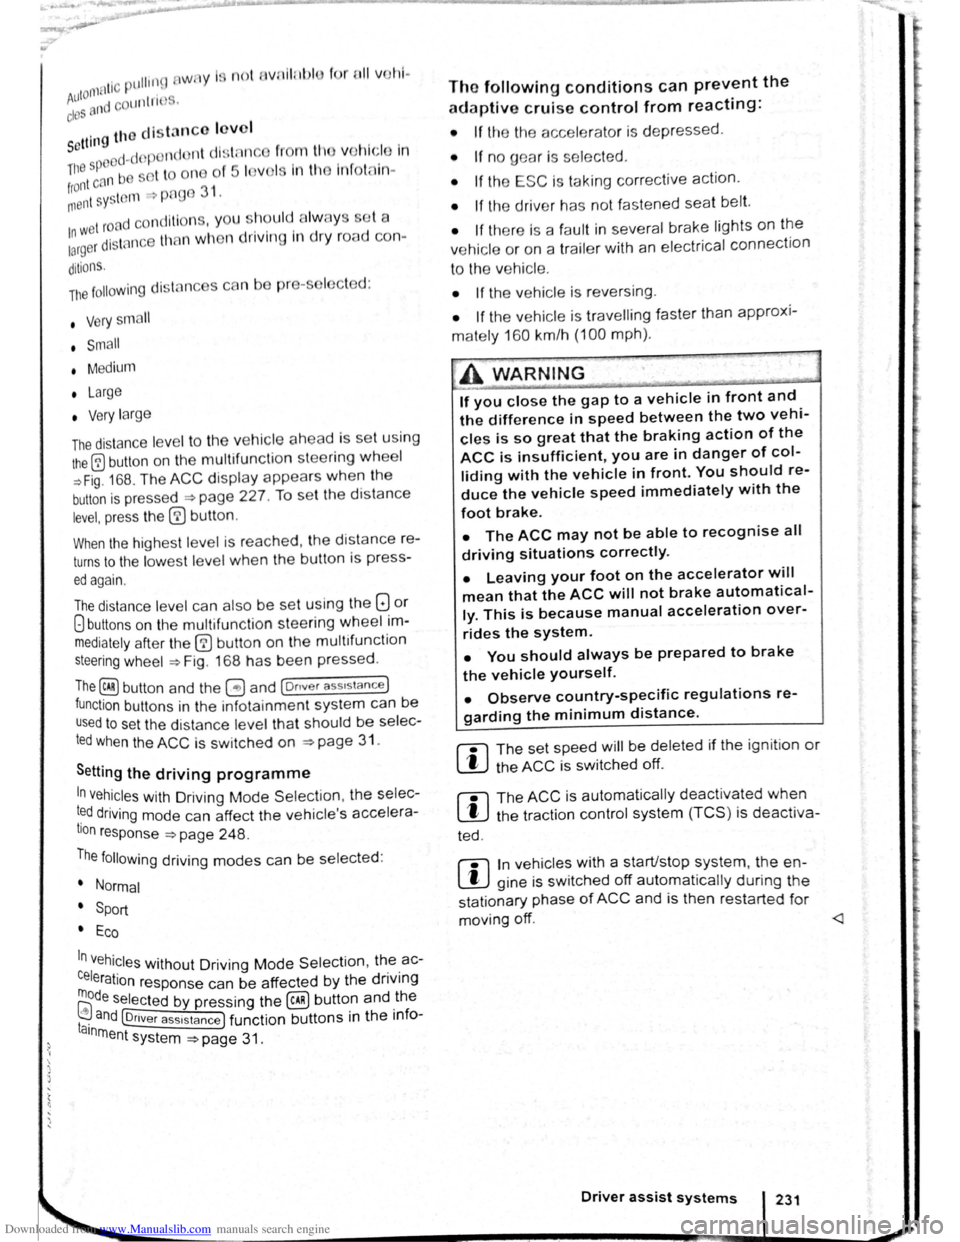 VOLKSWAGEN BEETLE 2008 Owners Manual Downloaded from www.Manualslib.com manuals search engine ,,nti pttllinfl W• y I not wnllniJI  for tdl vo h l-
fltllOI  · and cOtllltJJ( ciOS · 
. g th o clist::tnco lo vo l sett Ill 
P d -d O I n